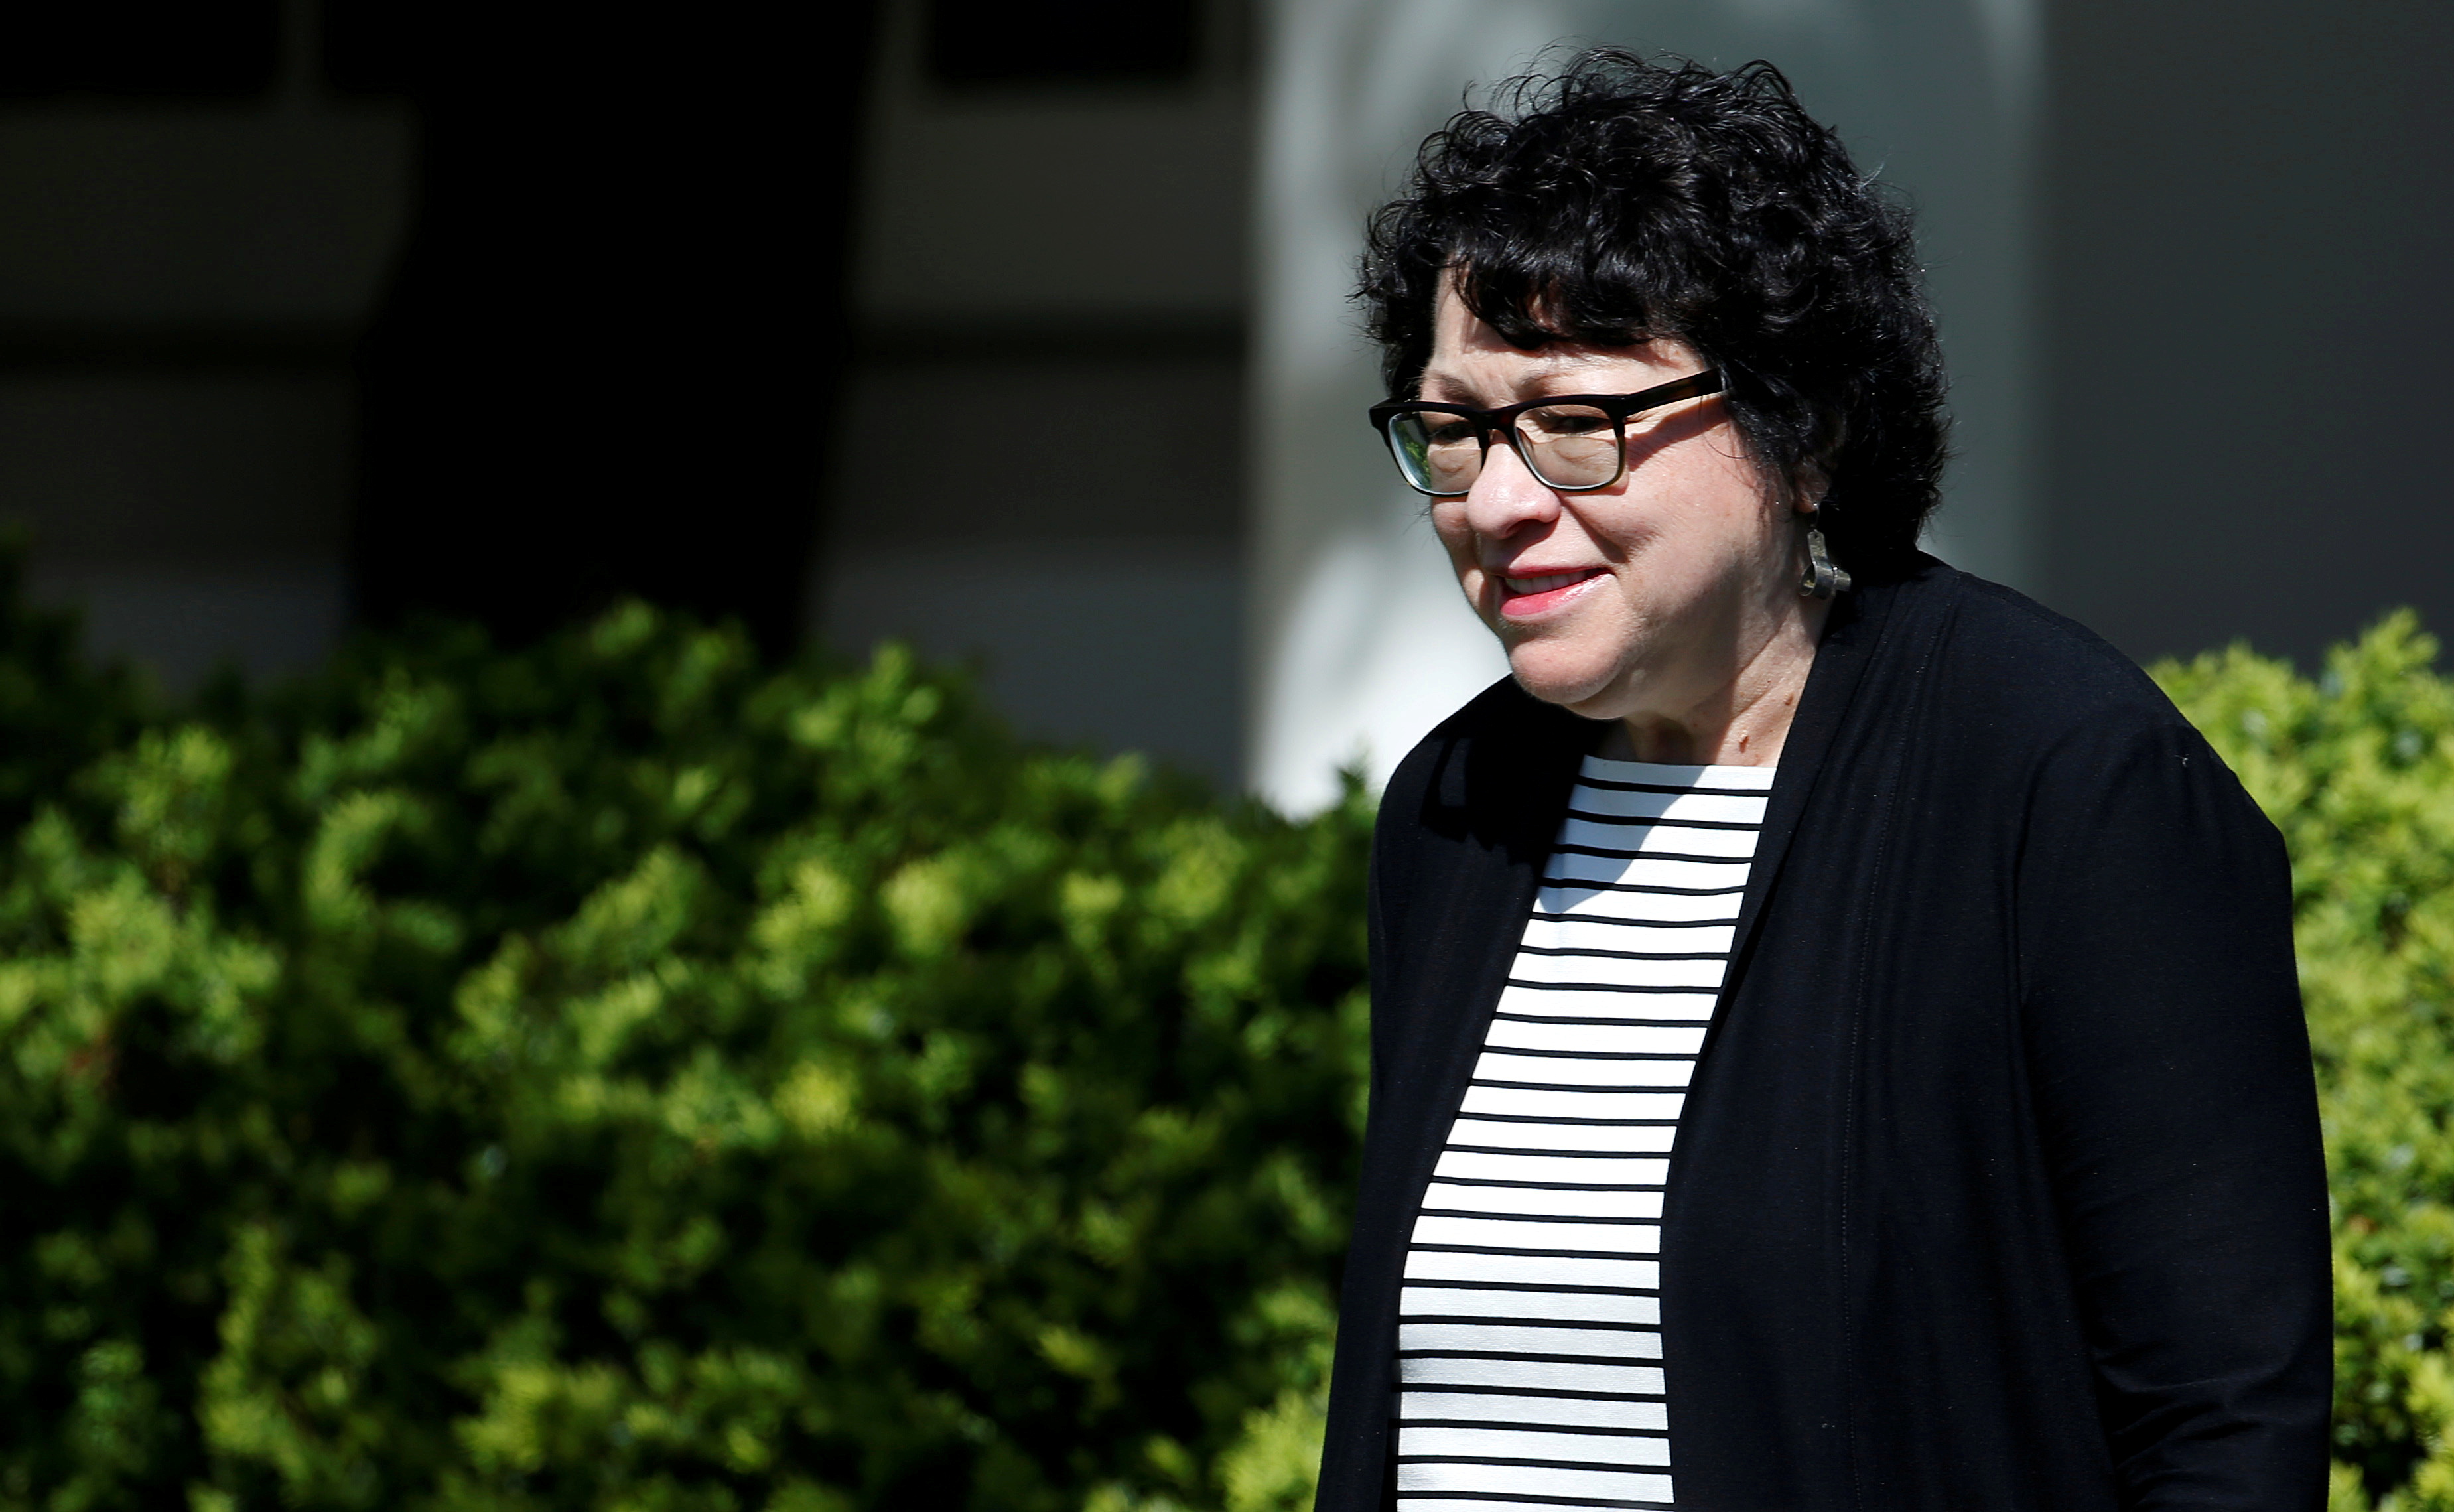 Associate Supreme Court Justice Sonya Sotomayor arrives for the swearing in ceremony of Judge Neil Gorsuch as an Associate Supreme Court Justice in the Rose Garden of the White House in Washington, U.S., April 10, 2017.    REUTERS/Joshua Roberts/File Photo